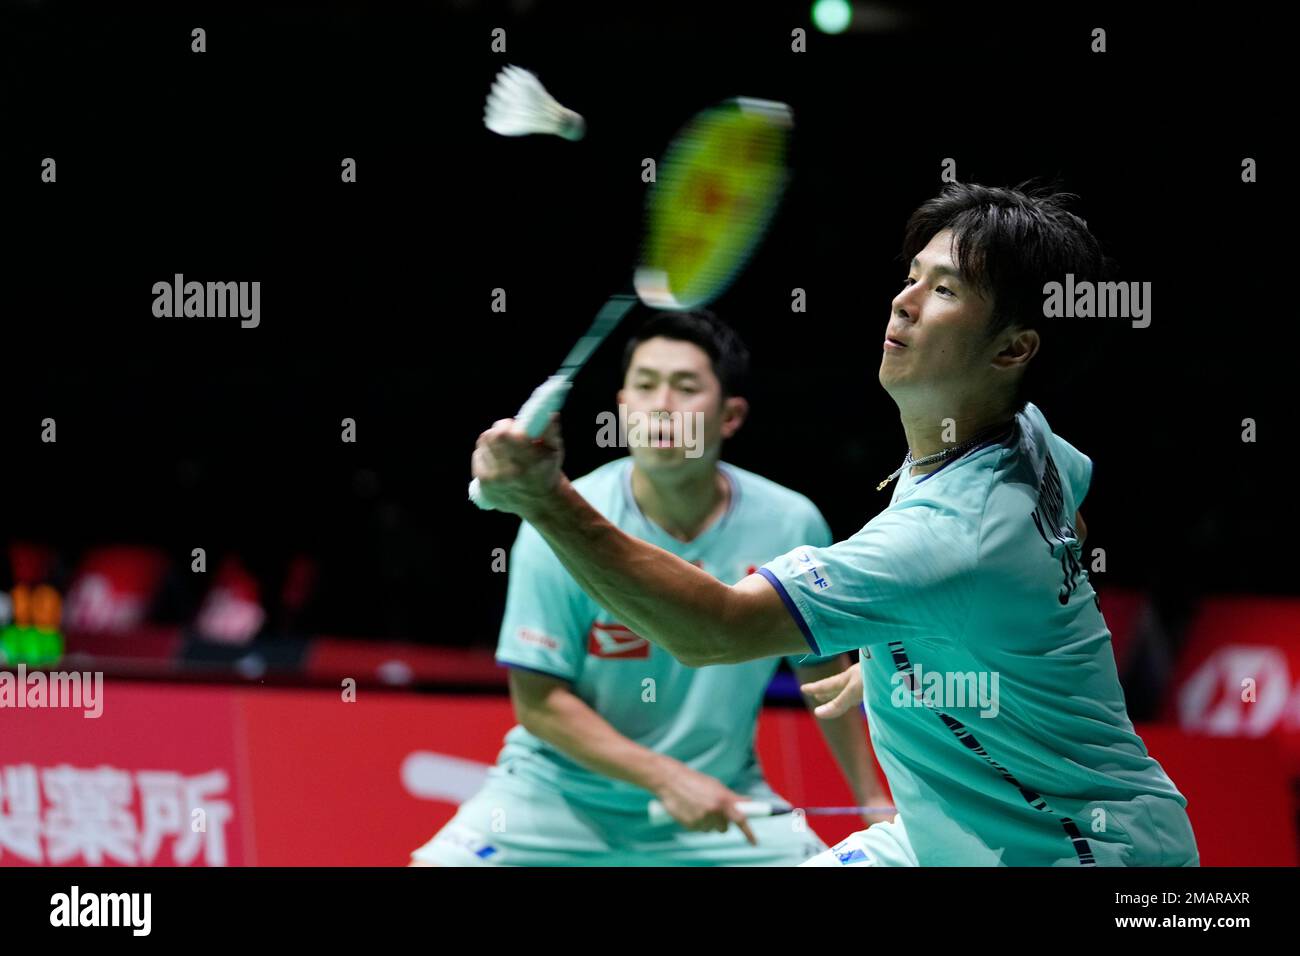 Yugo Kobayashi, with Takuro Hoki of Japan, plays a return during a badminton game of the mens doubles against Alexander Dunn and Adam Hall of Scotland in the BWF World Championships in